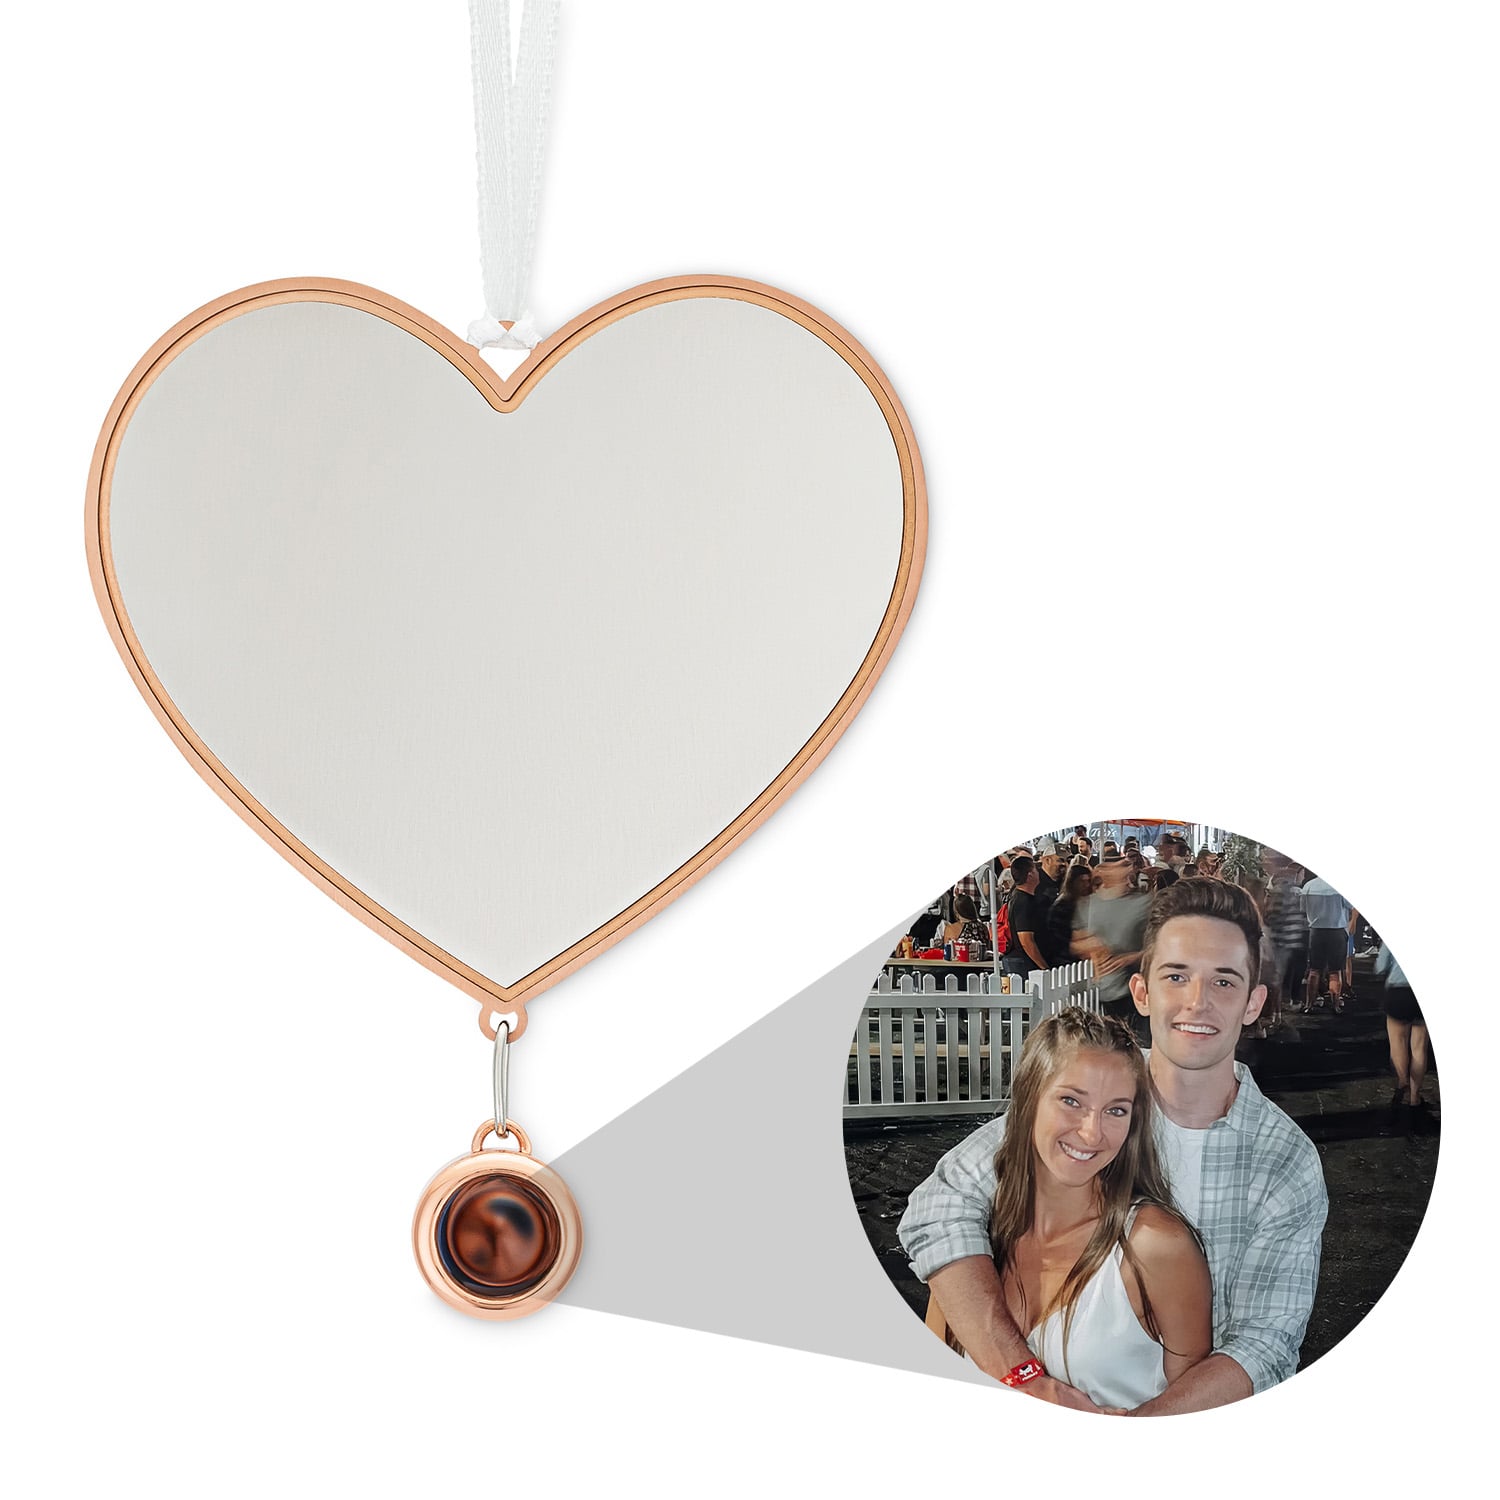 Personalized Heart Locket Necklace With Photo Personalized 